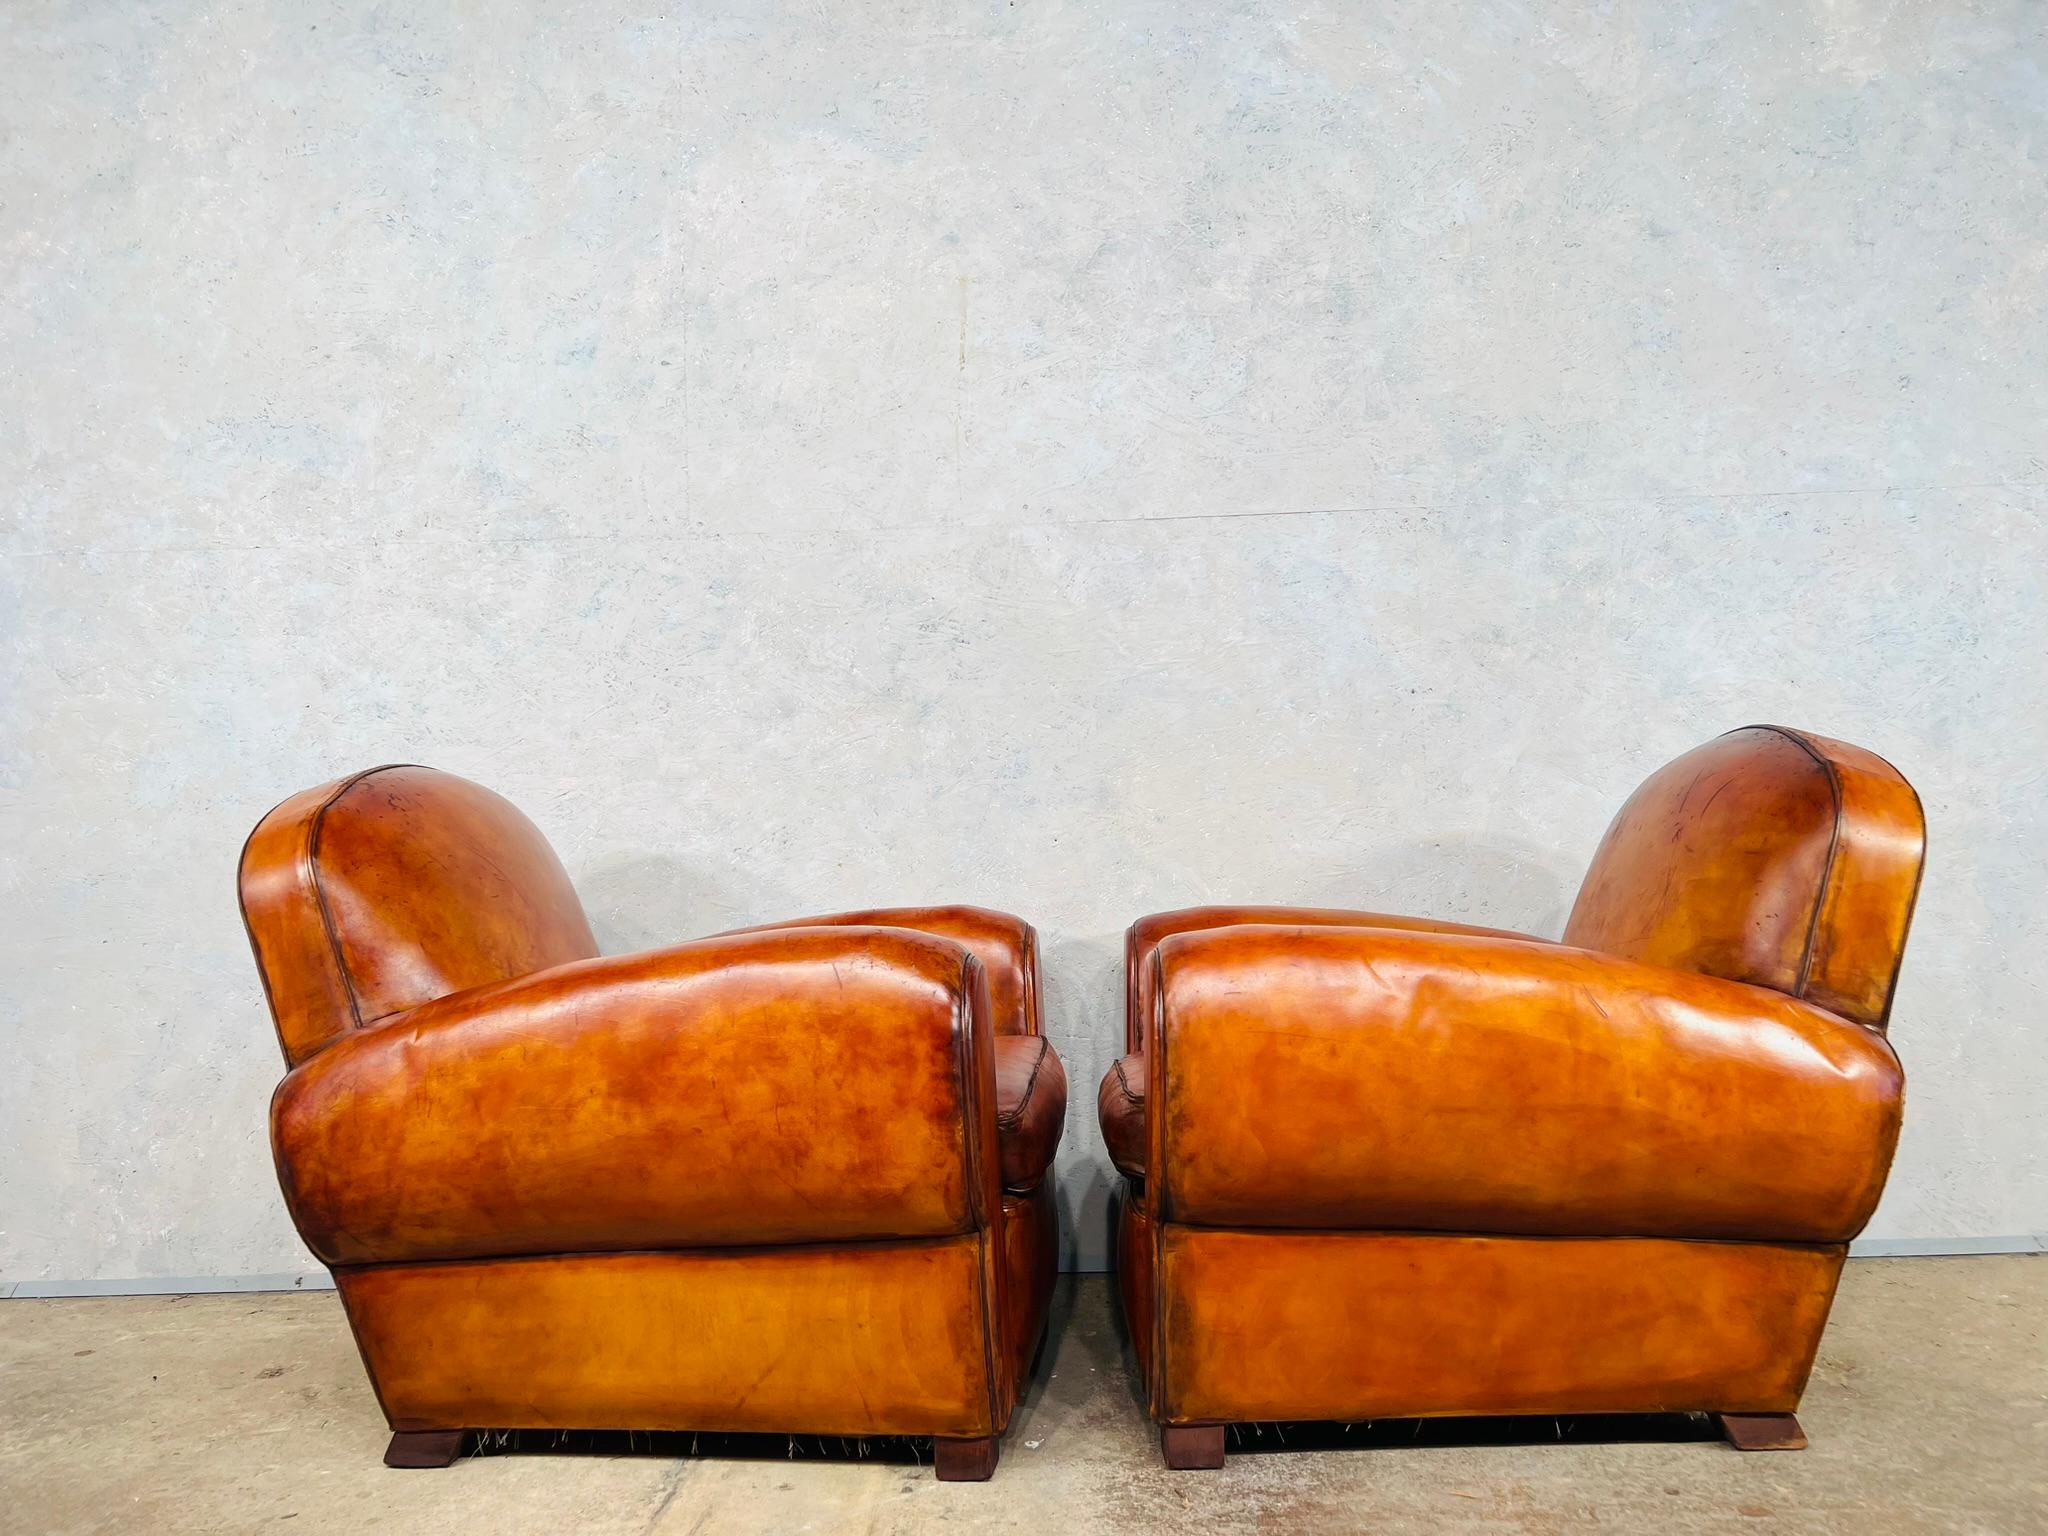 Stunning Pair of Leather French Club Chairs circa 1930 Patinated Cognac Color For Sale 7